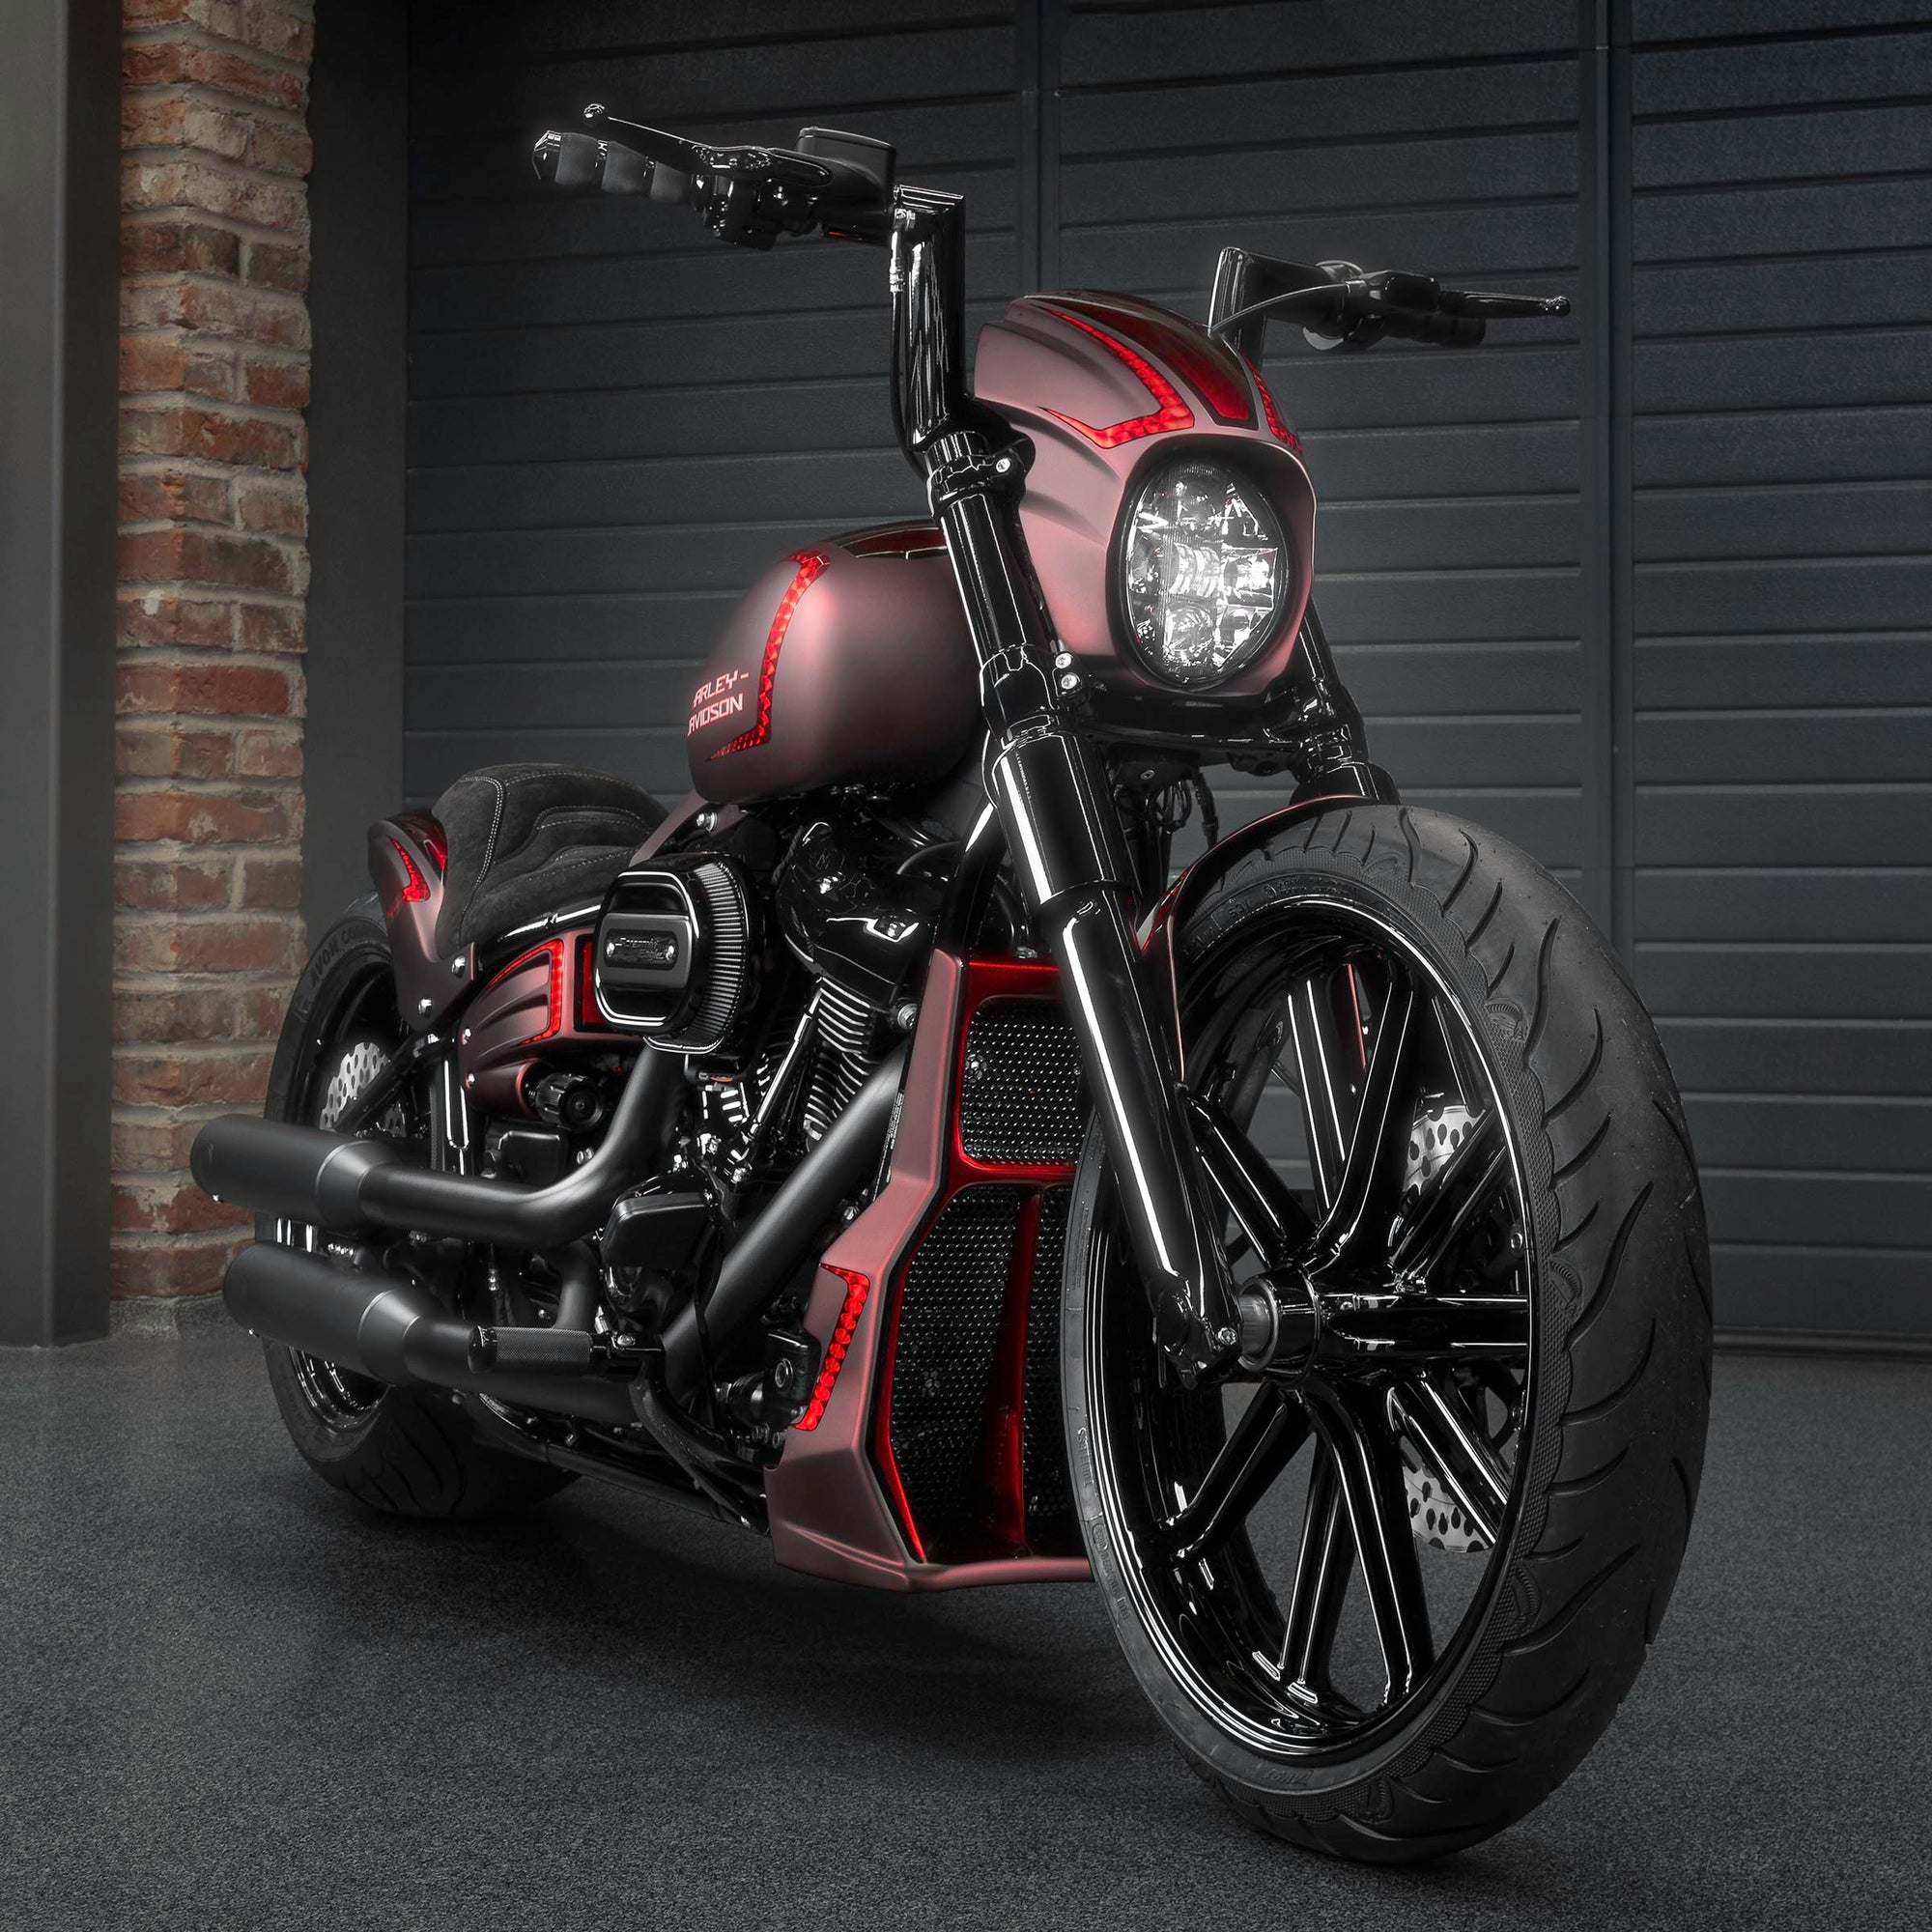 Modified Harley Davidson Breakout motorcycle with Killer Custom parts from the front in a modern garage